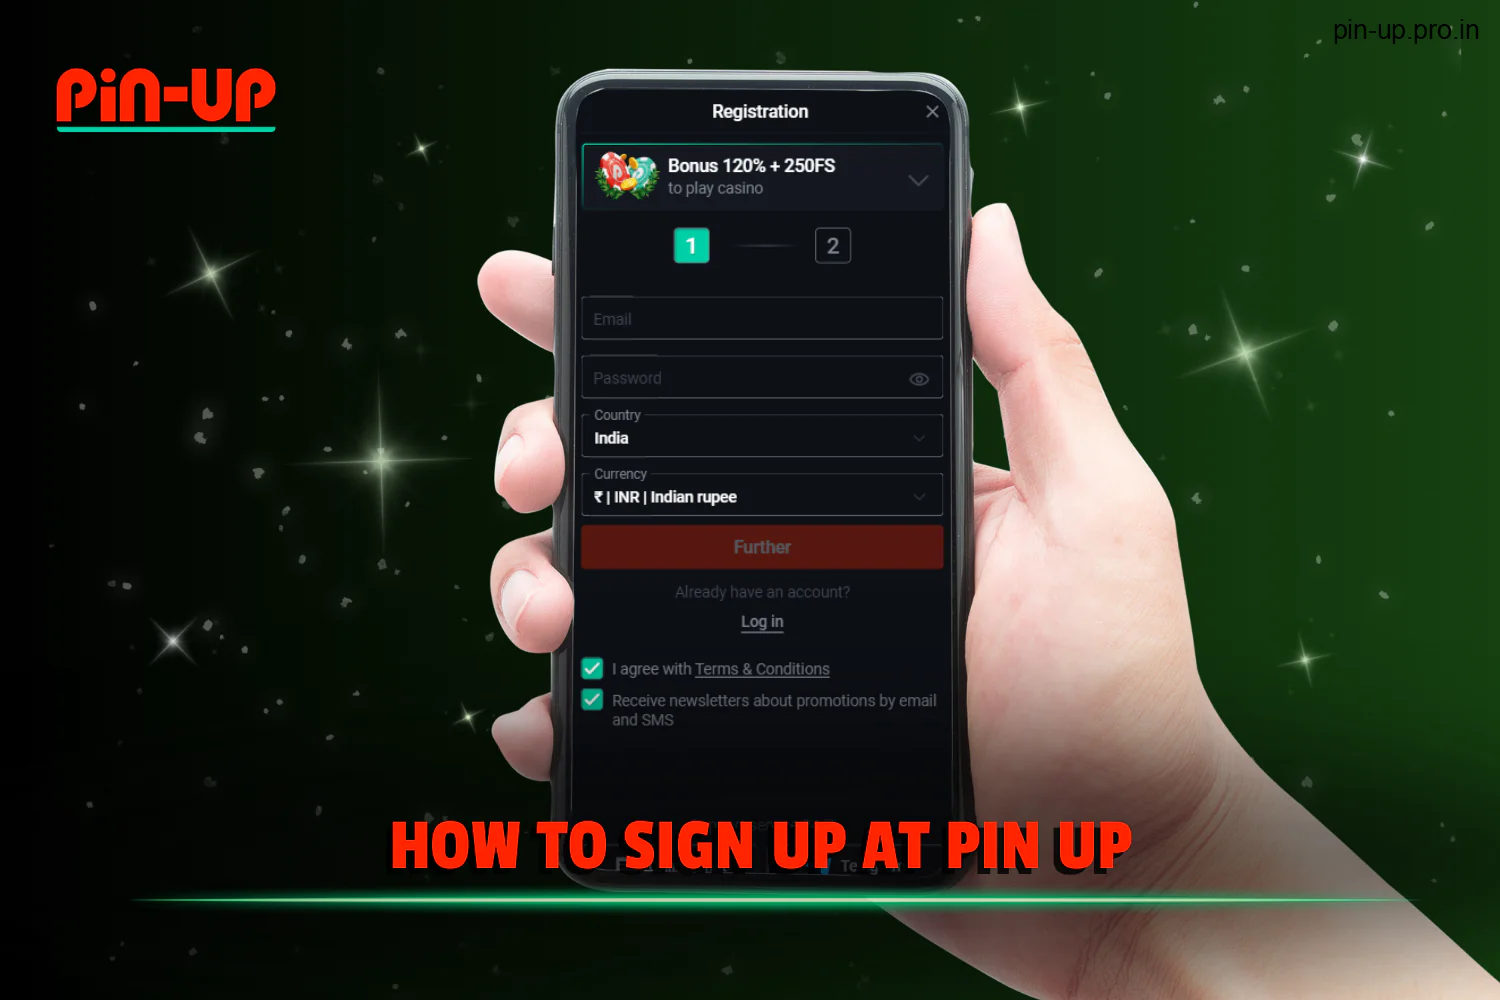 Pin Up for Indian users has a universal step-by-step instruction on how to register